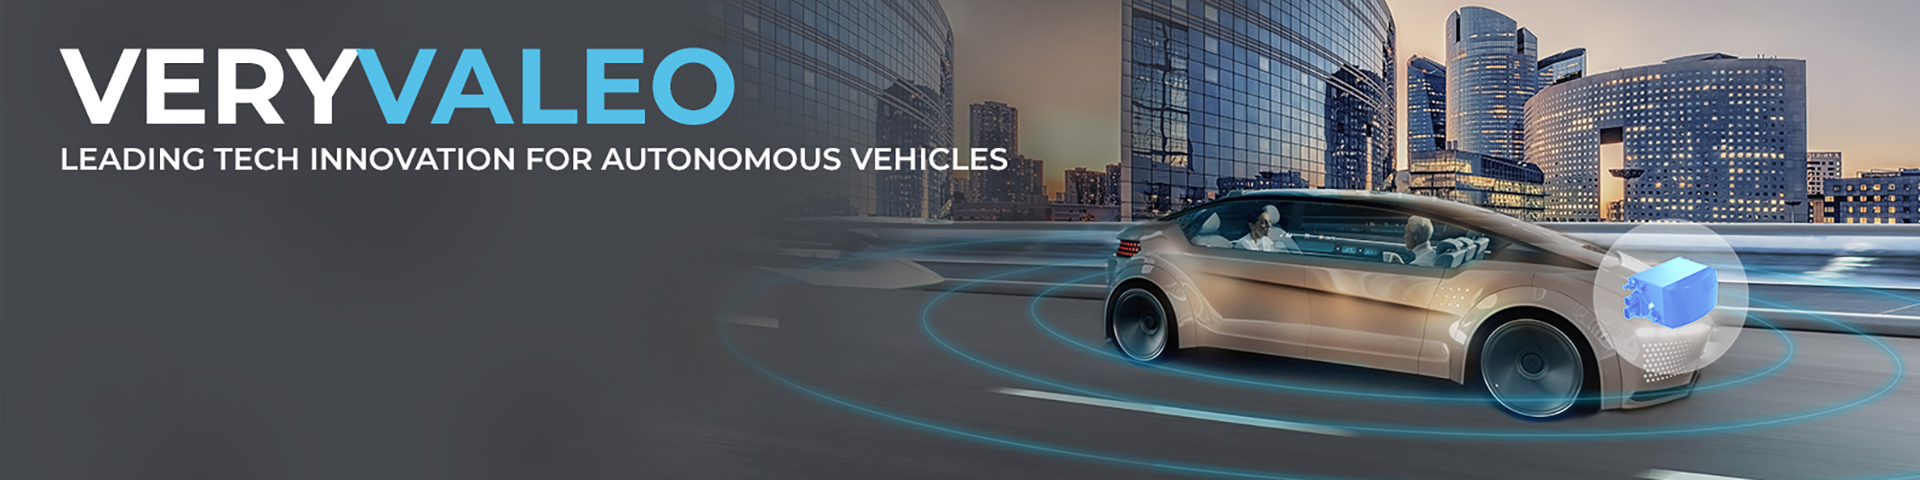 Join us and lead tech innovation for cleaner and safer mobility!